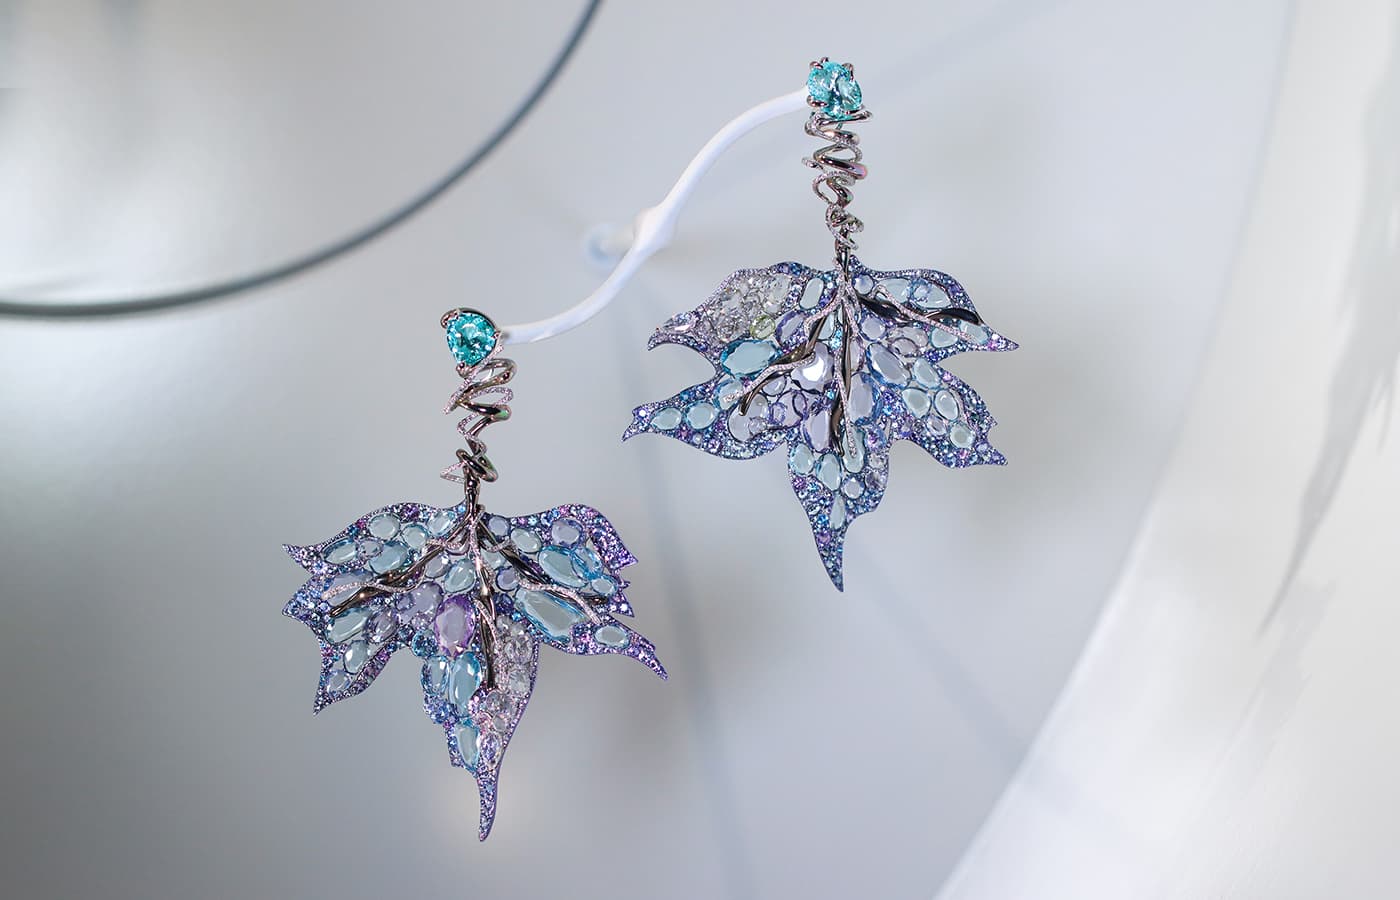 Feng J 'Blue Maple Leaf' earrings with a pair of 4.80 carat Paraiba tourmalines, double rose-cut spinel, aquamarine, tanzanite and diamonds in 18k electroplated gold